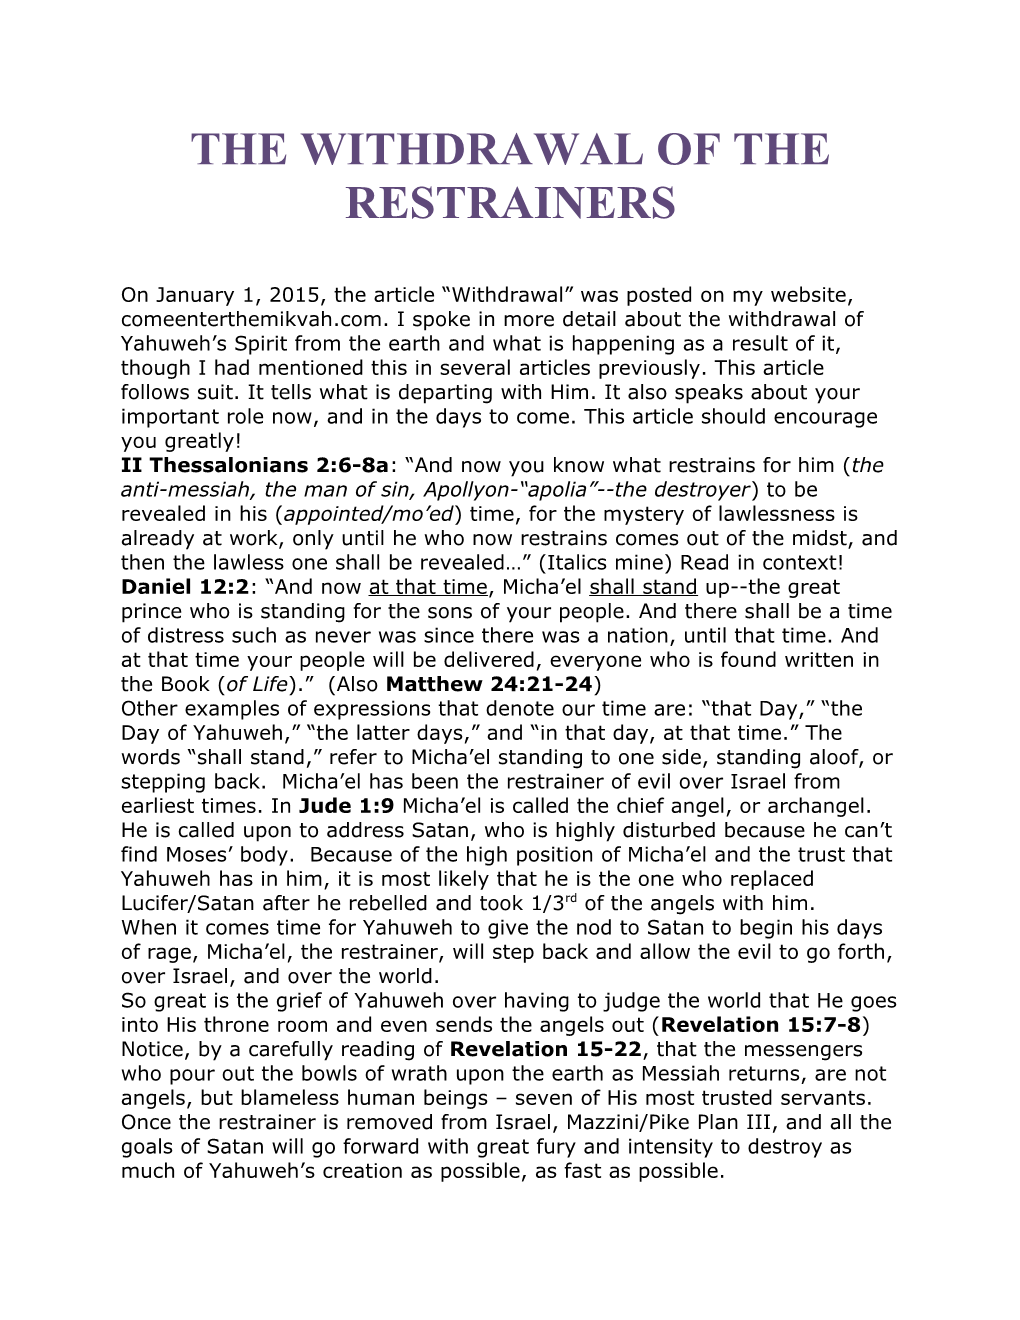 The Withdrawal of the Restrainers